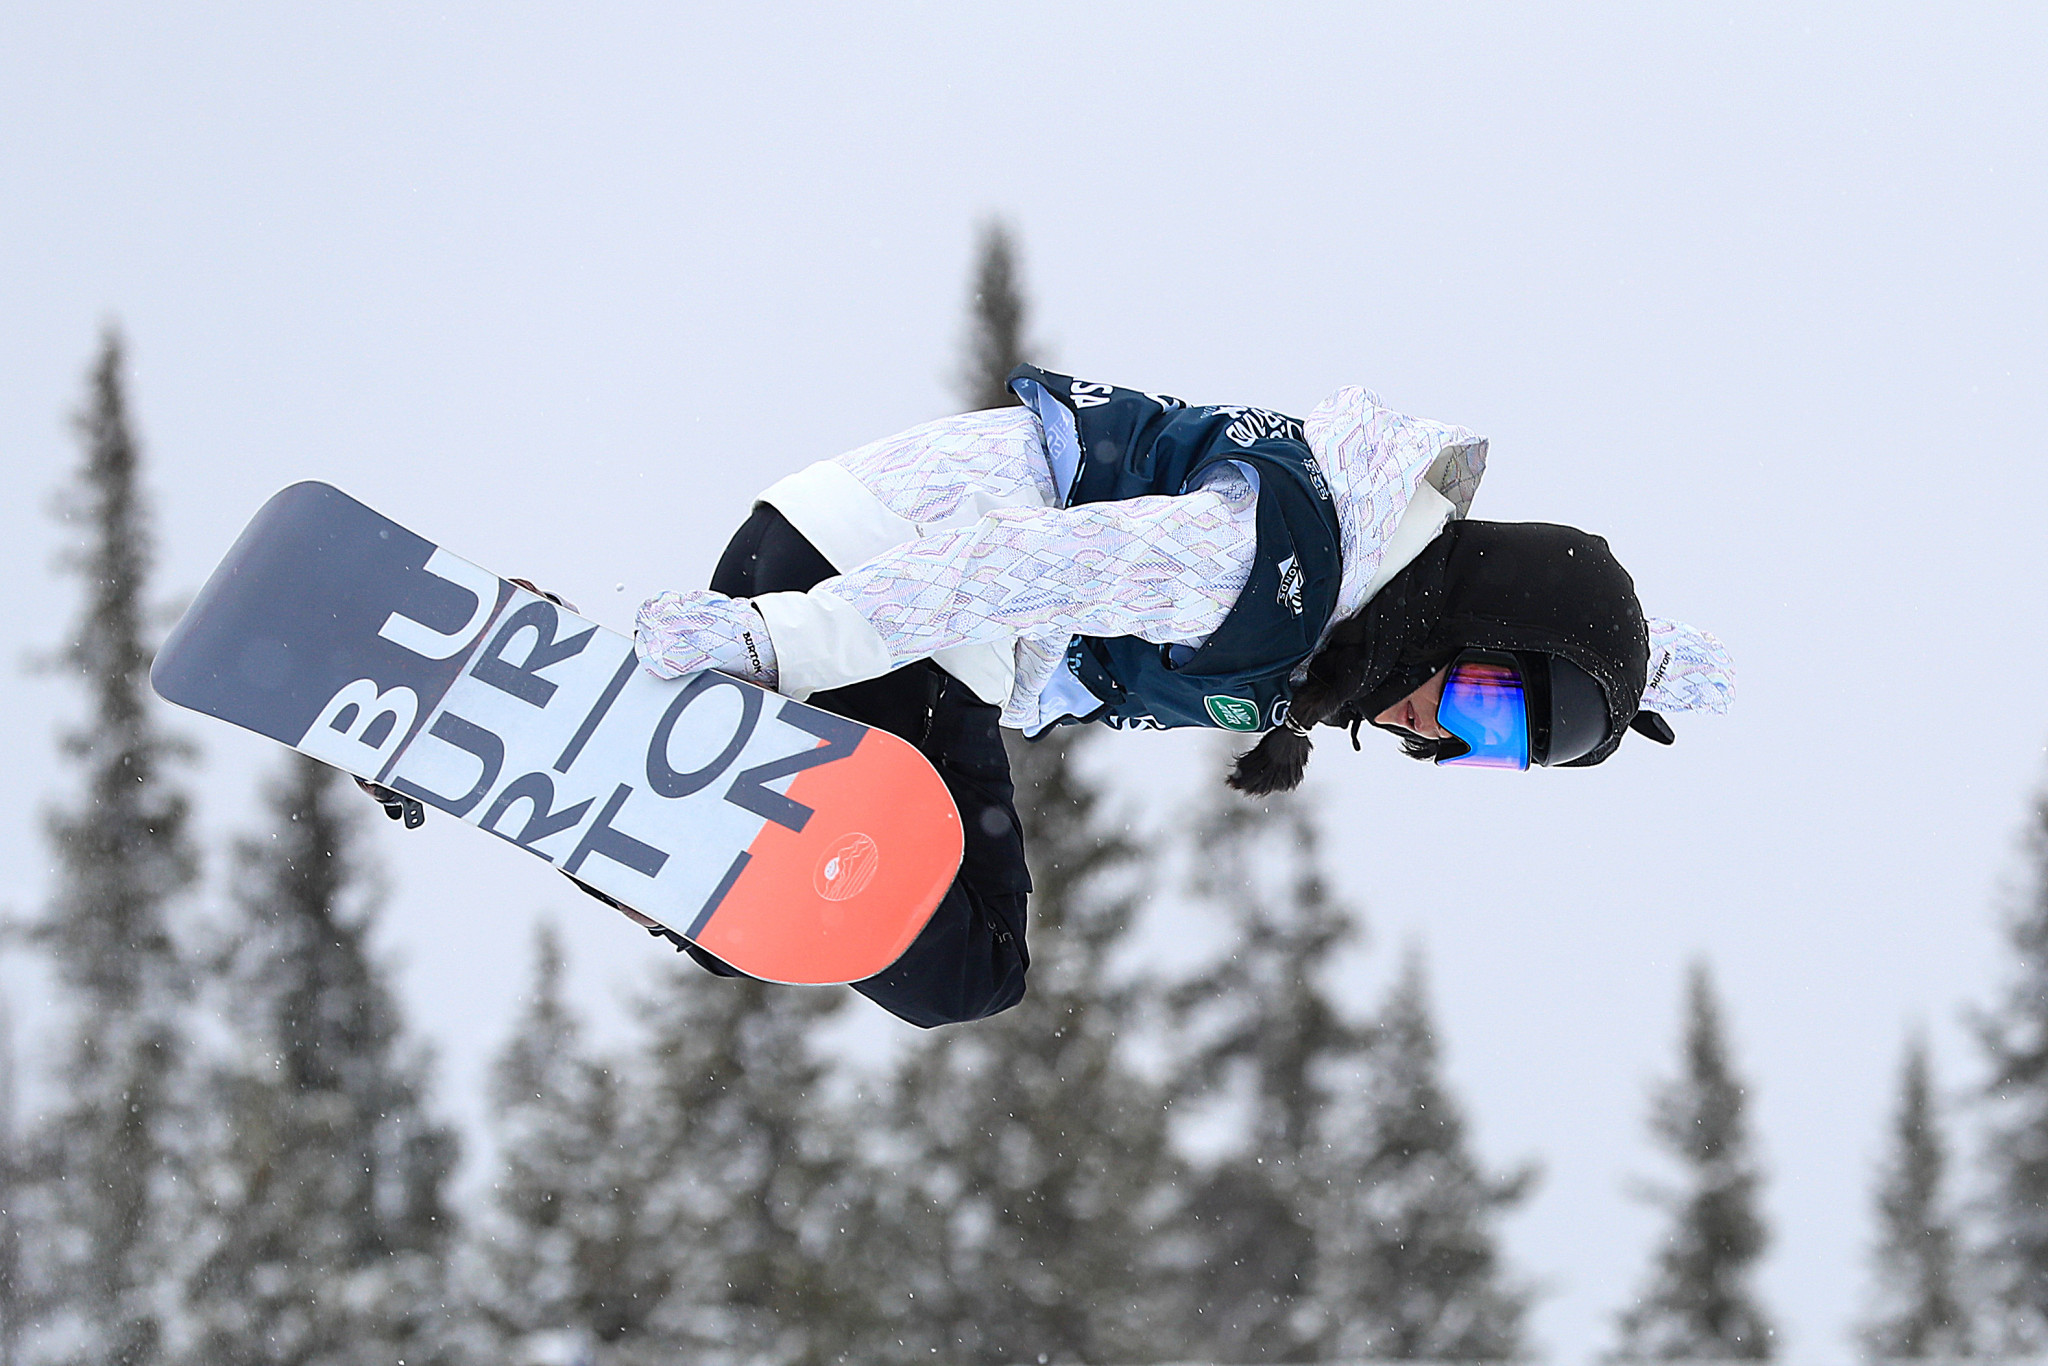 Liu and James head qualification at Snowboard Halfpipe World Cup in China